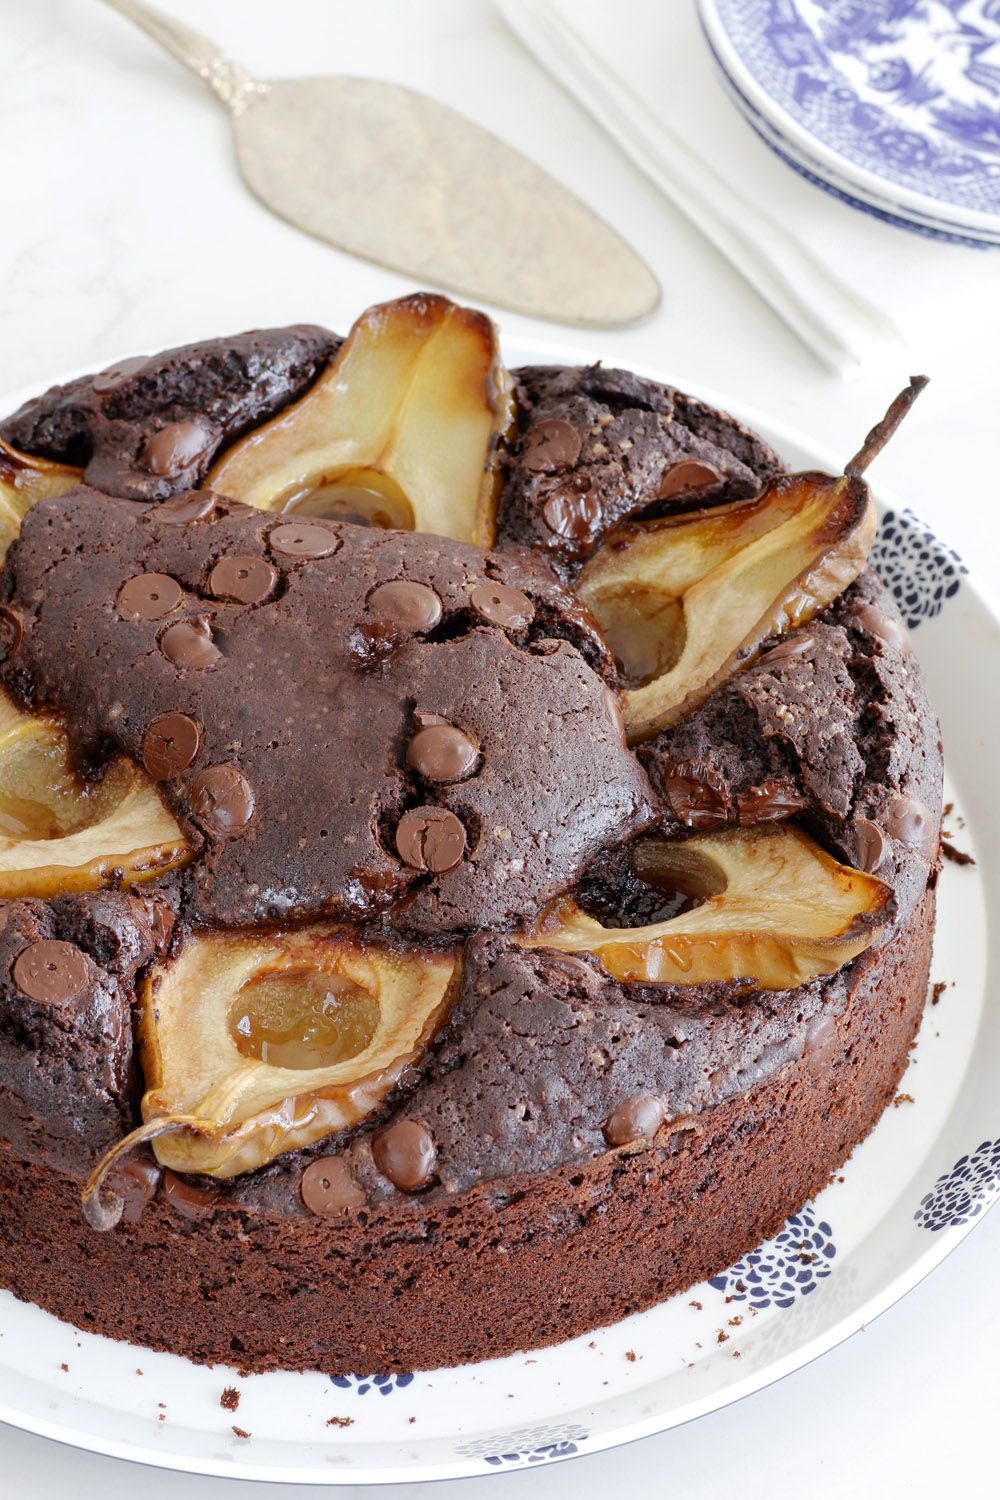 Pecan Chocolate Cake with Pears